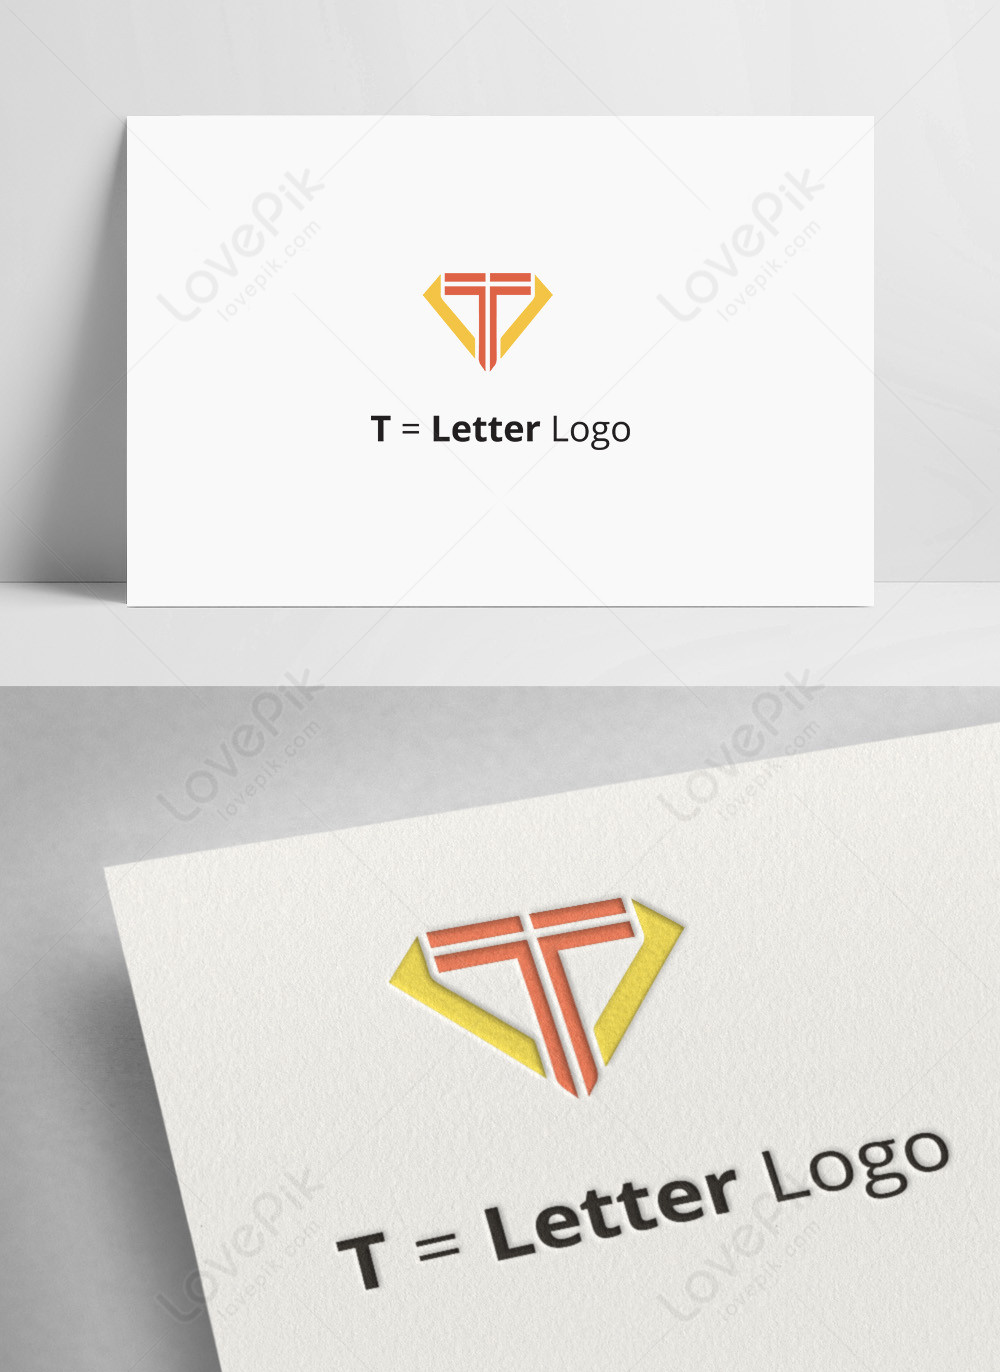 logo ideas with letters t